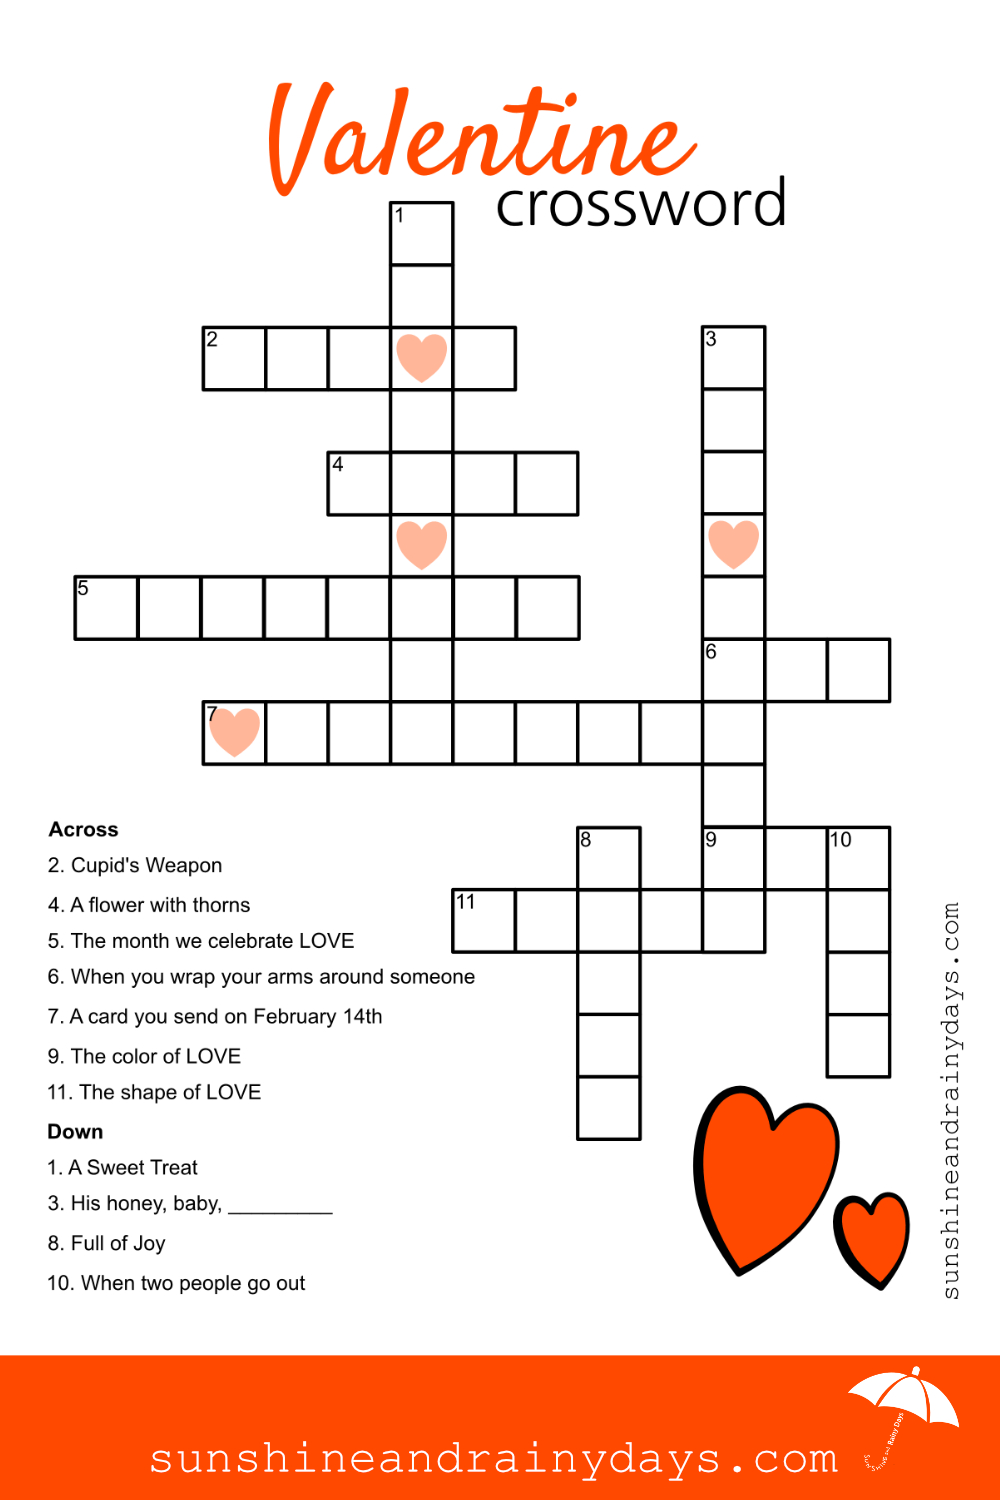 Valentine Crossword Puzzle - Sunshine And Rainy Days - Printable Crossword Puzzles About Love